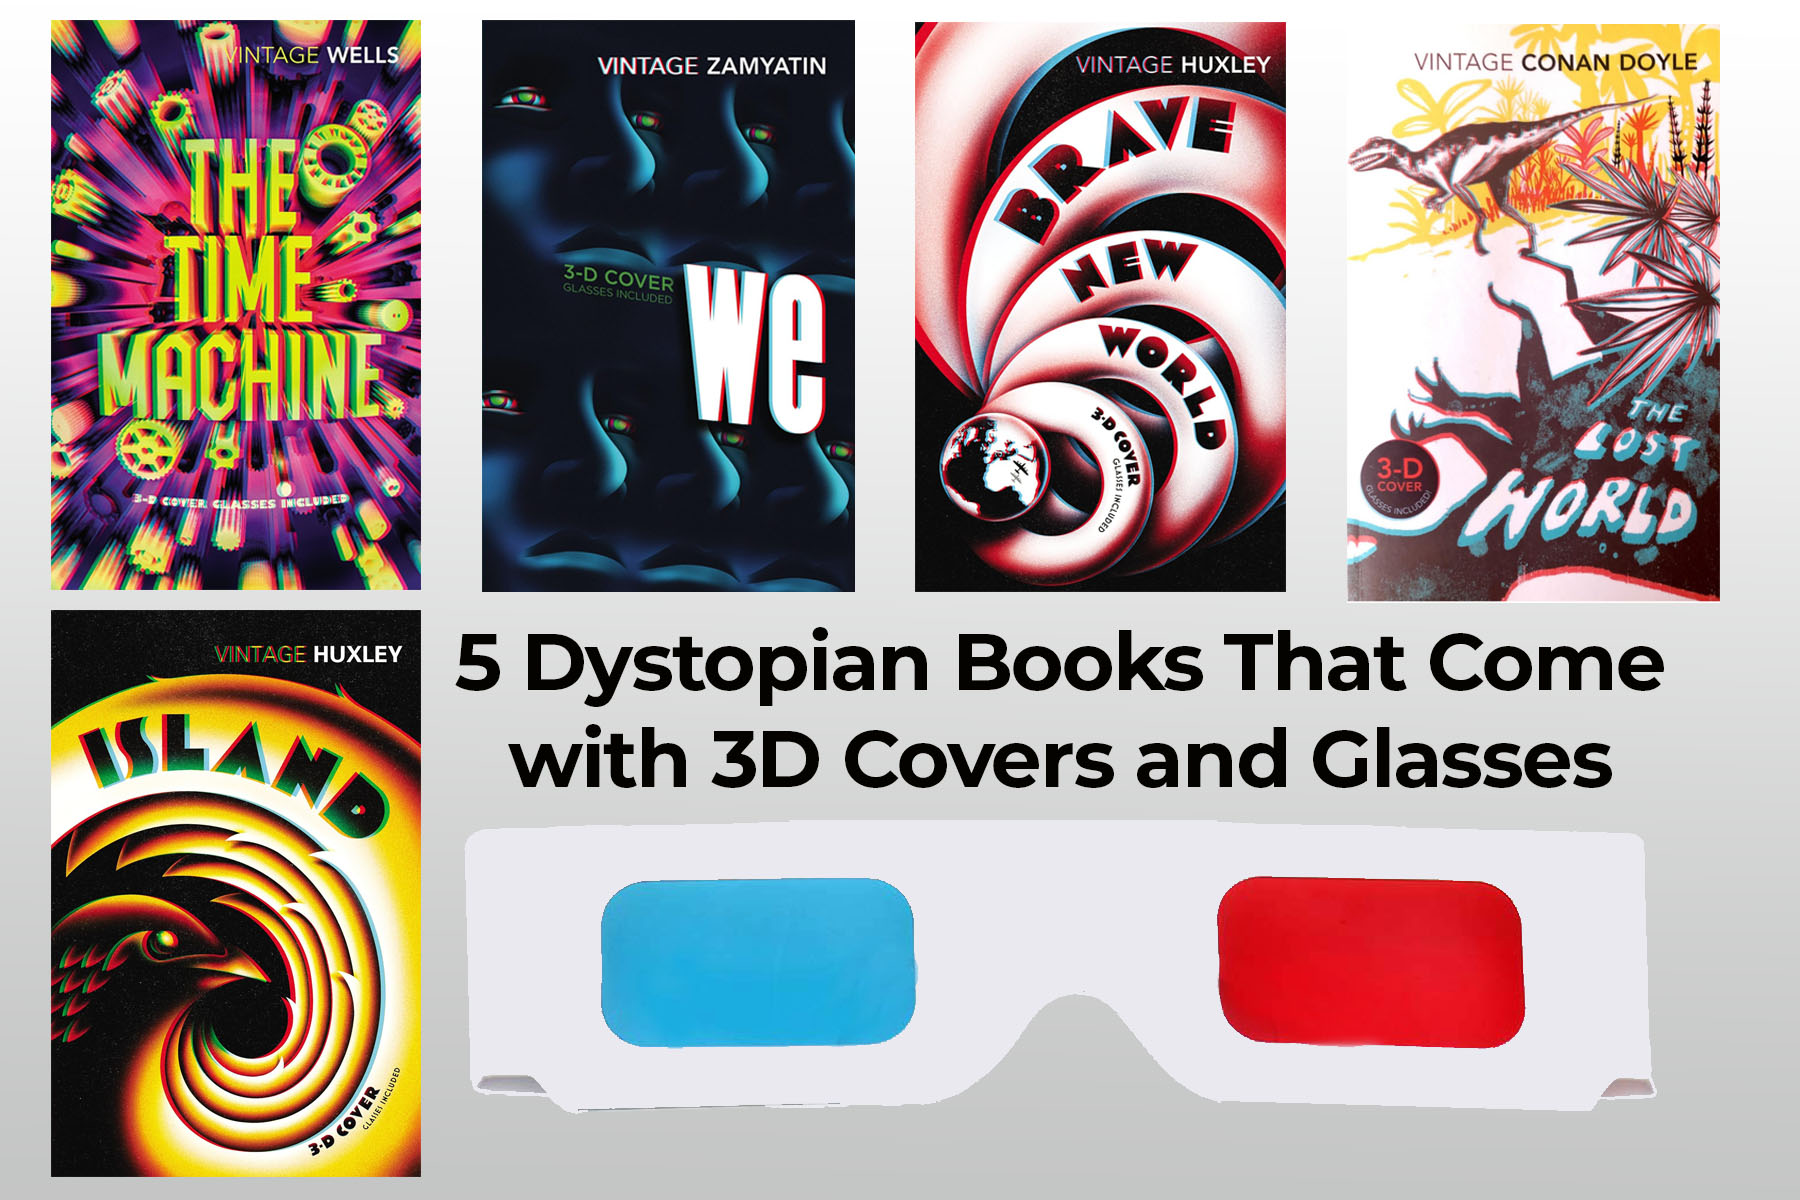 Dystopian books with 3d covers and glasses